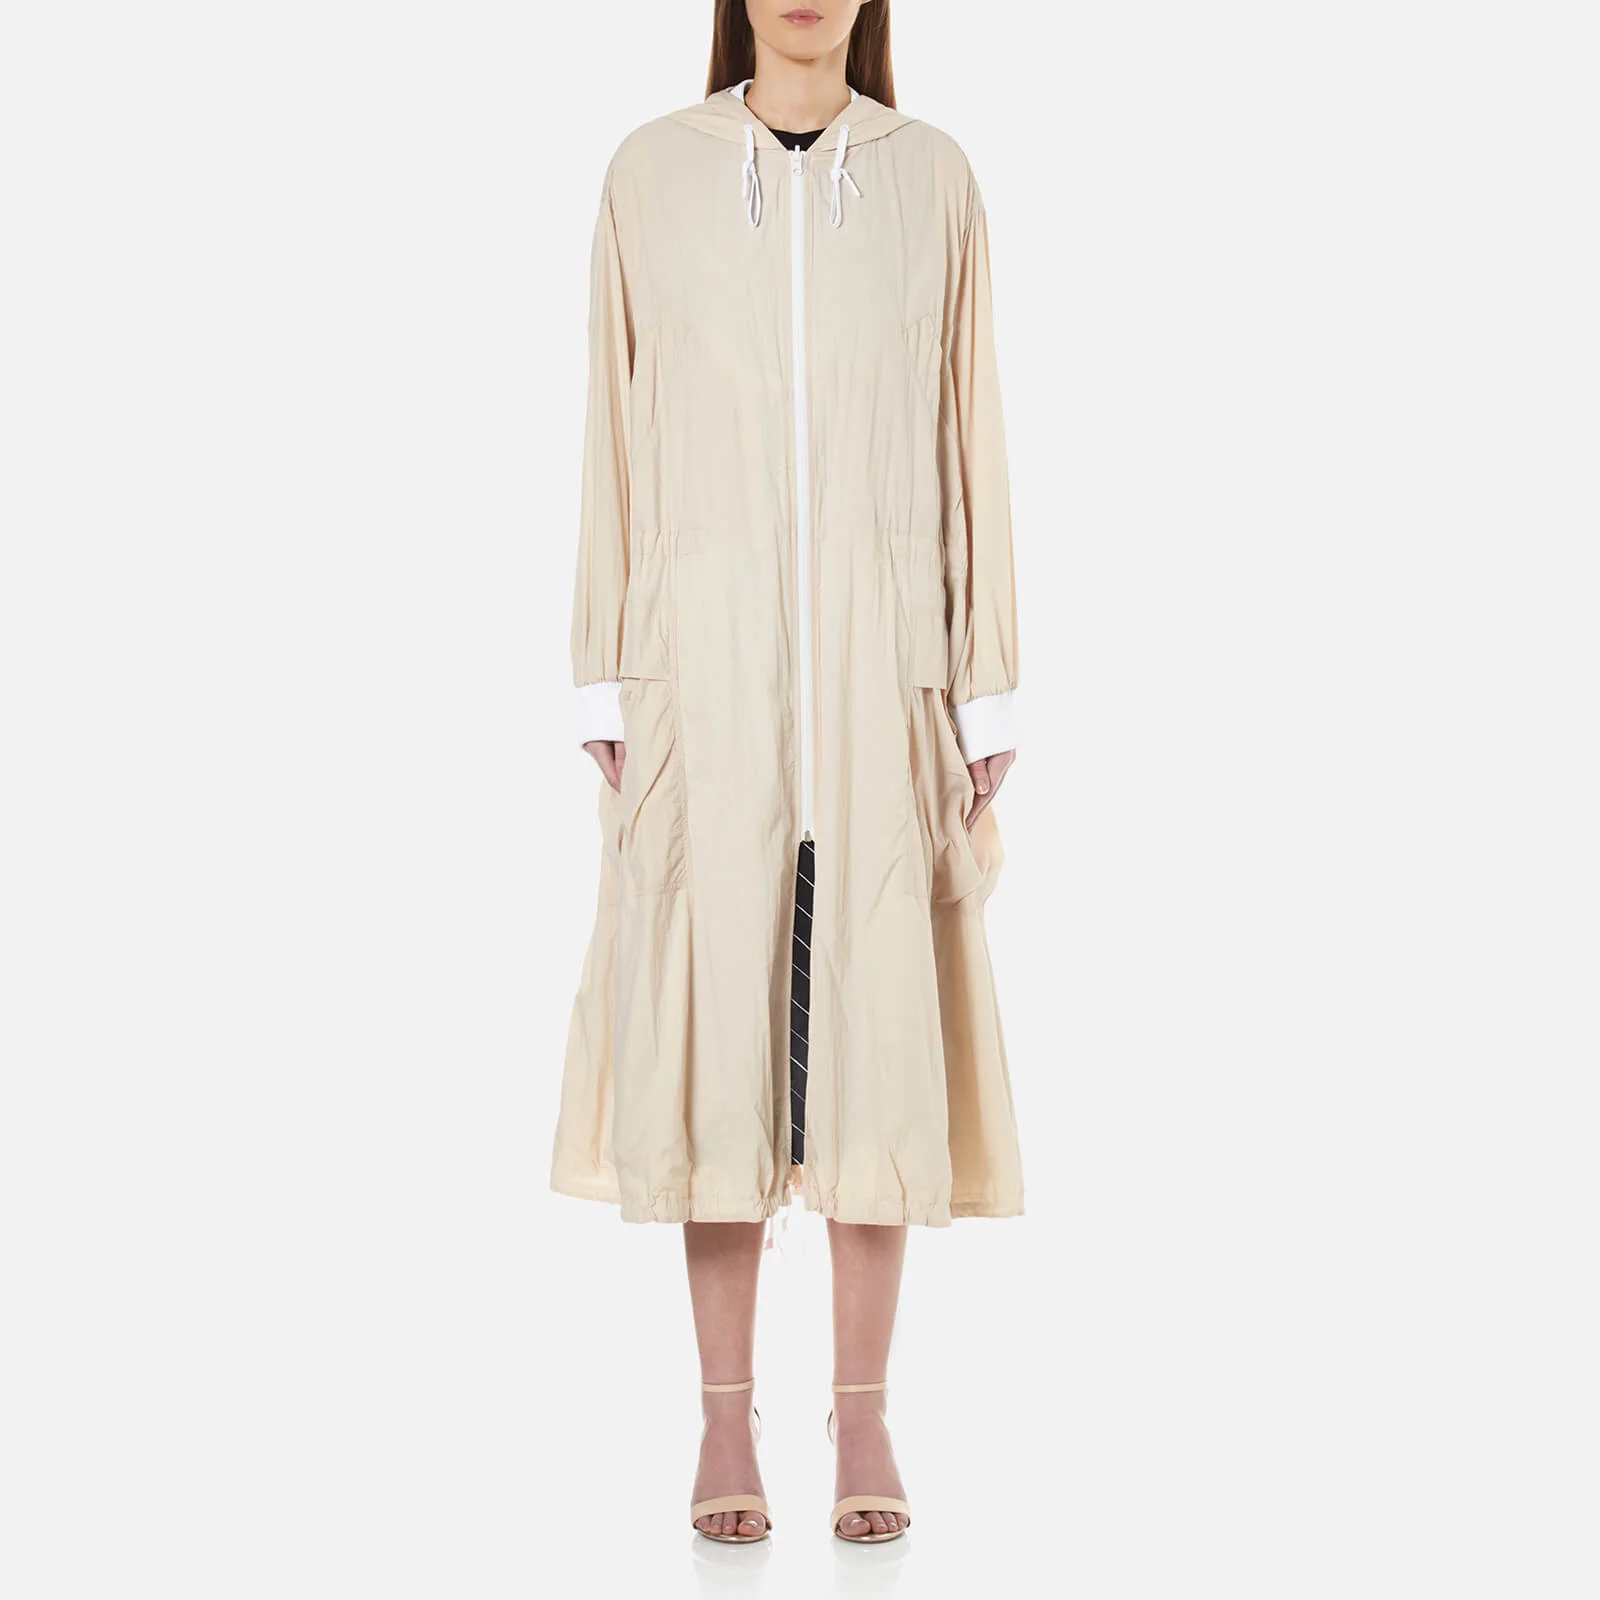 DKNY Women's Pure Reversible Oversized Hooded Coat - Gesso/Nude Image 1